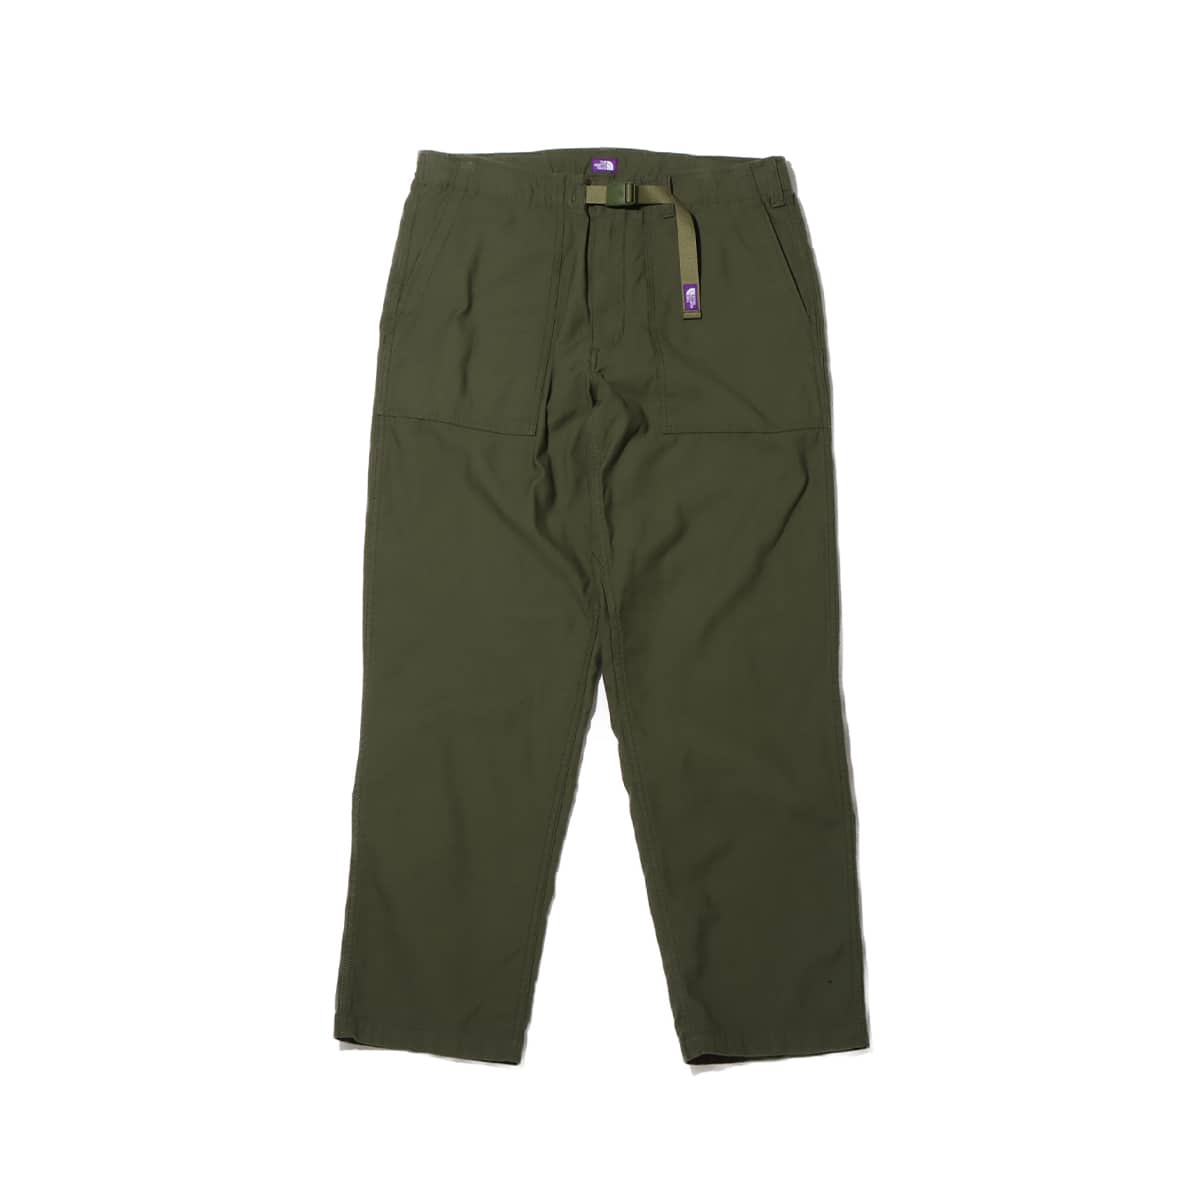 THE NORTH FACE PURPLE LABEL Field Baker Pants Olive Drab 24SS-I